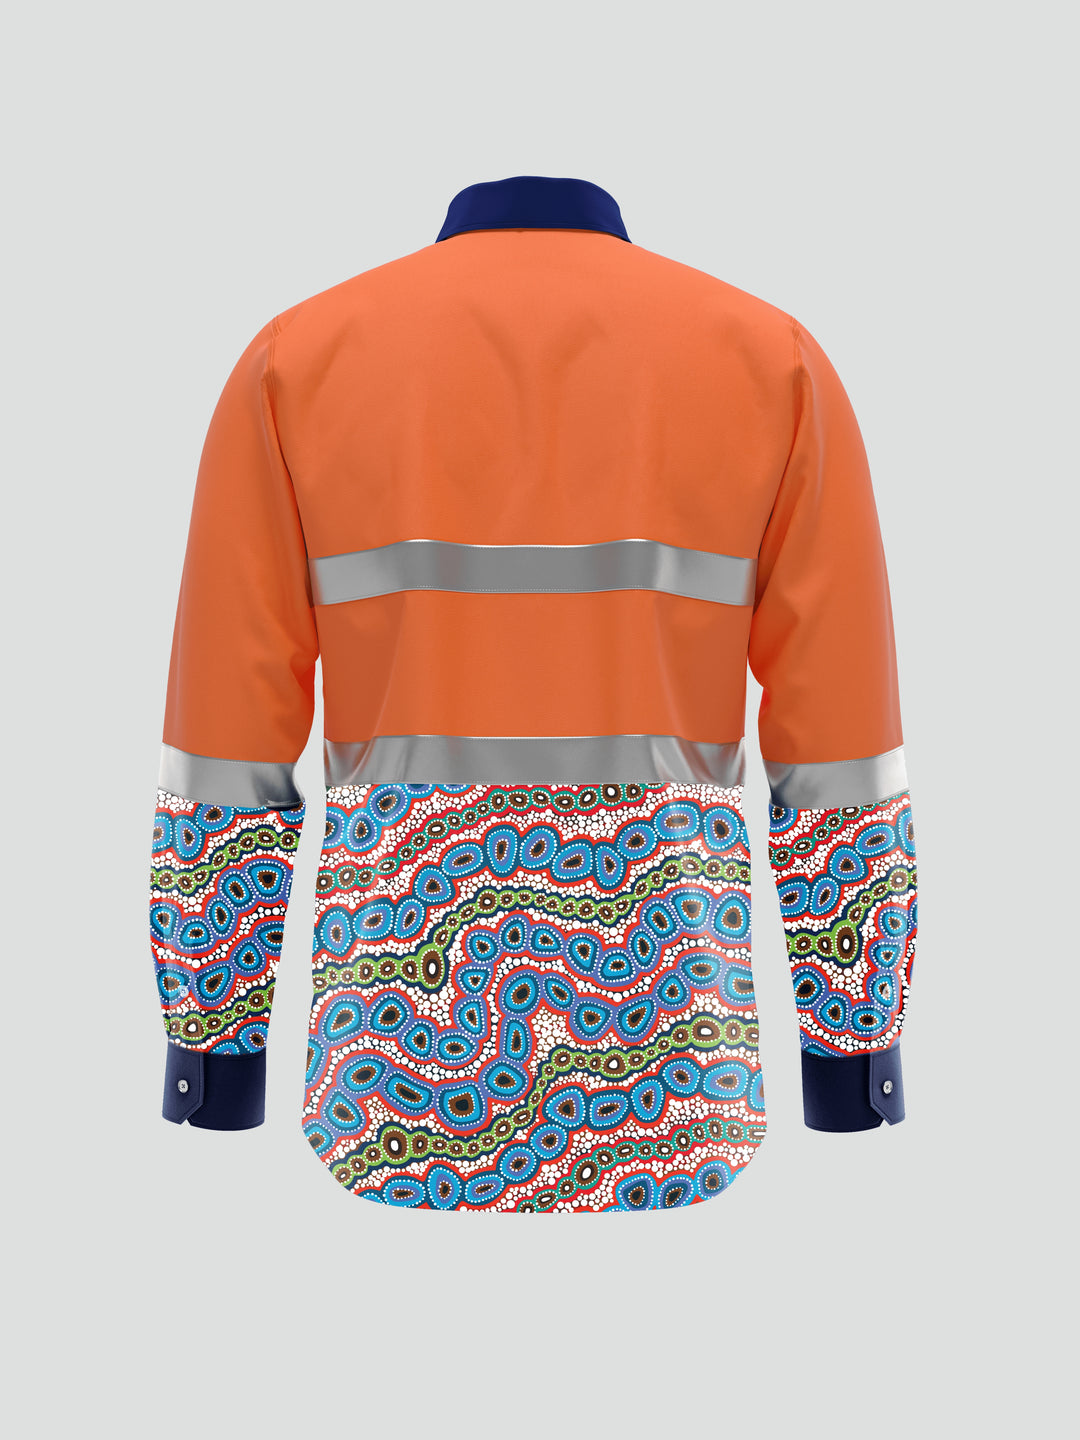 Contours of Country - Corporate Hi-Vis Unisex Workwear Shirt